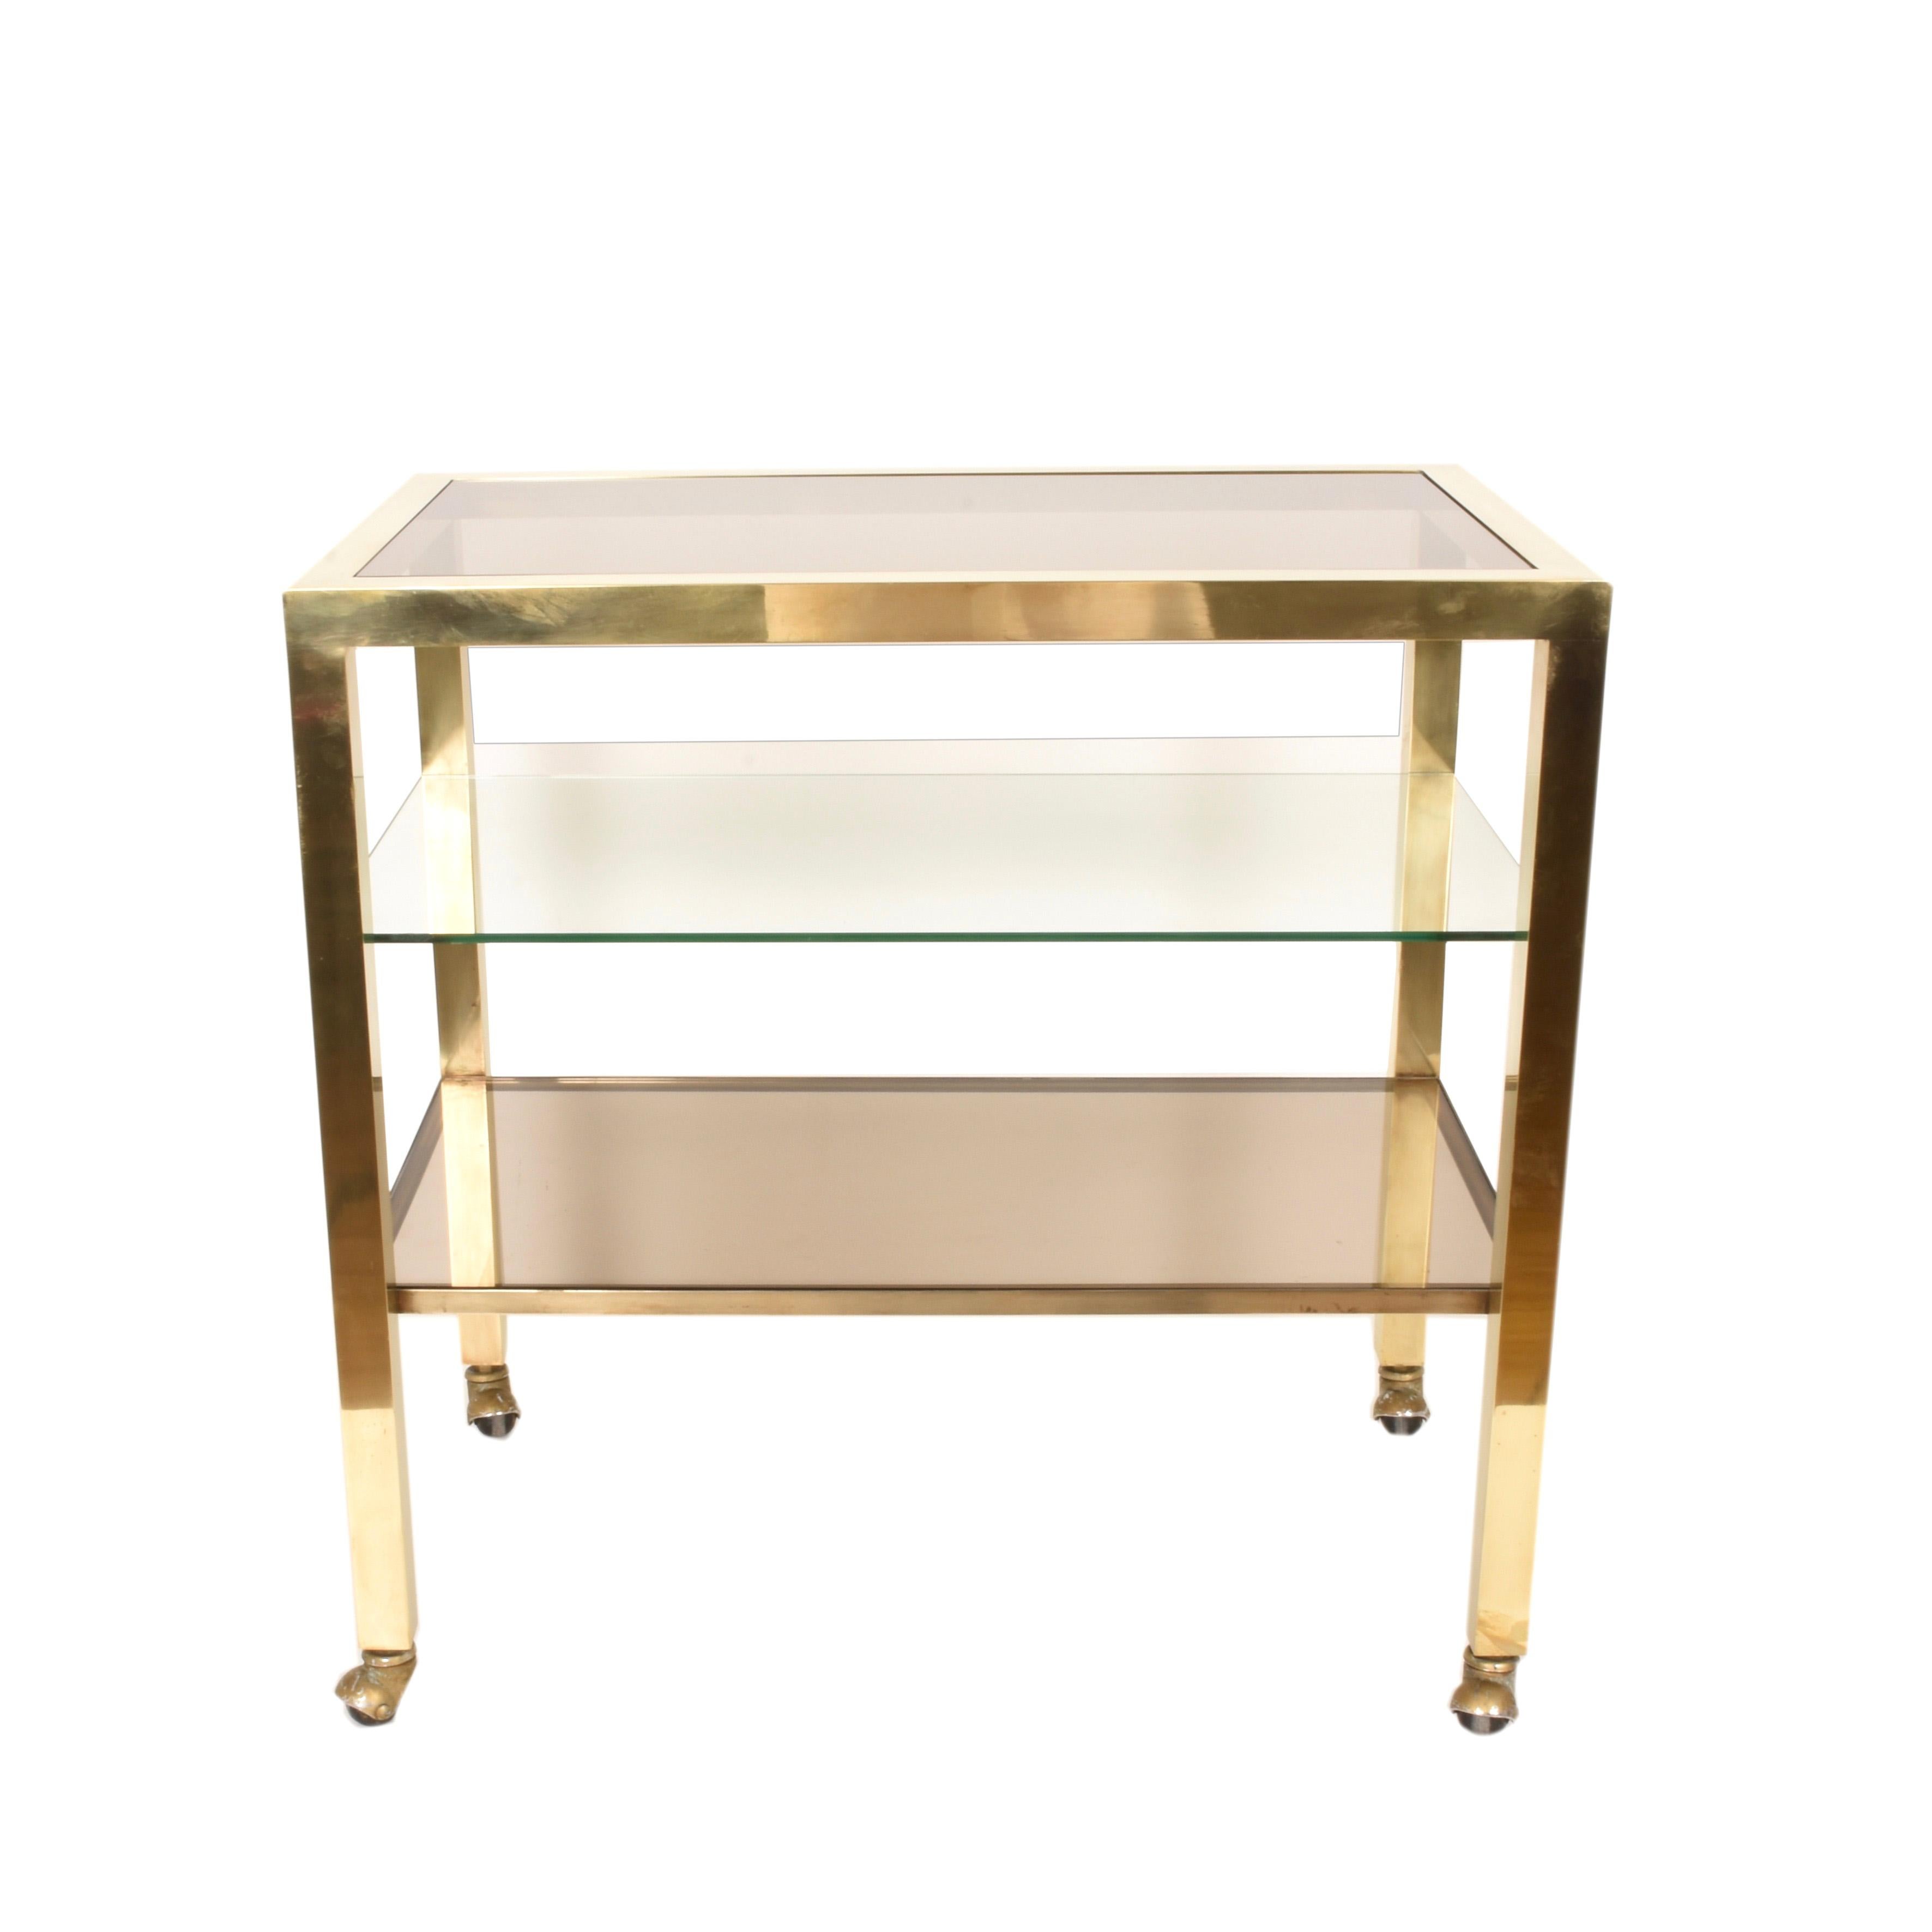 Mid-Century Modern Bar Cart Italy on Three Levels and Smoked Glass, Vintage 1970s Gold-Plated Brass For Sale